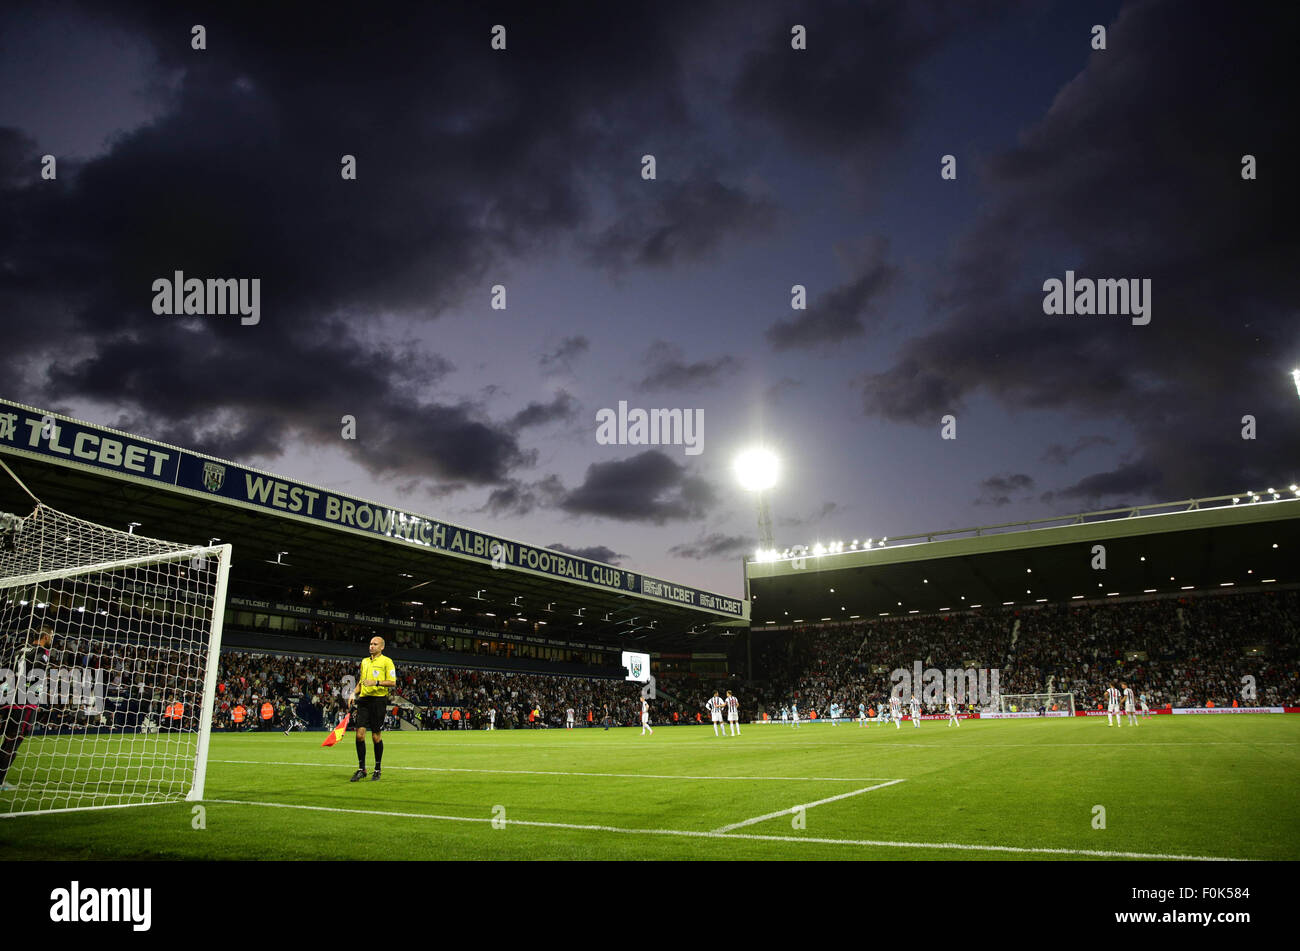 West Bromwich, UK. 10th Aug, 2015. General view of the Hawthorns under floodlight - English Premier League - WBA v Manchester City - The Hawthorns Stadium - West Bromwich - England - 10th August 2015 - Picture Simon Bellis/Sportimage/CSM/Alamy Live News Stock Photo